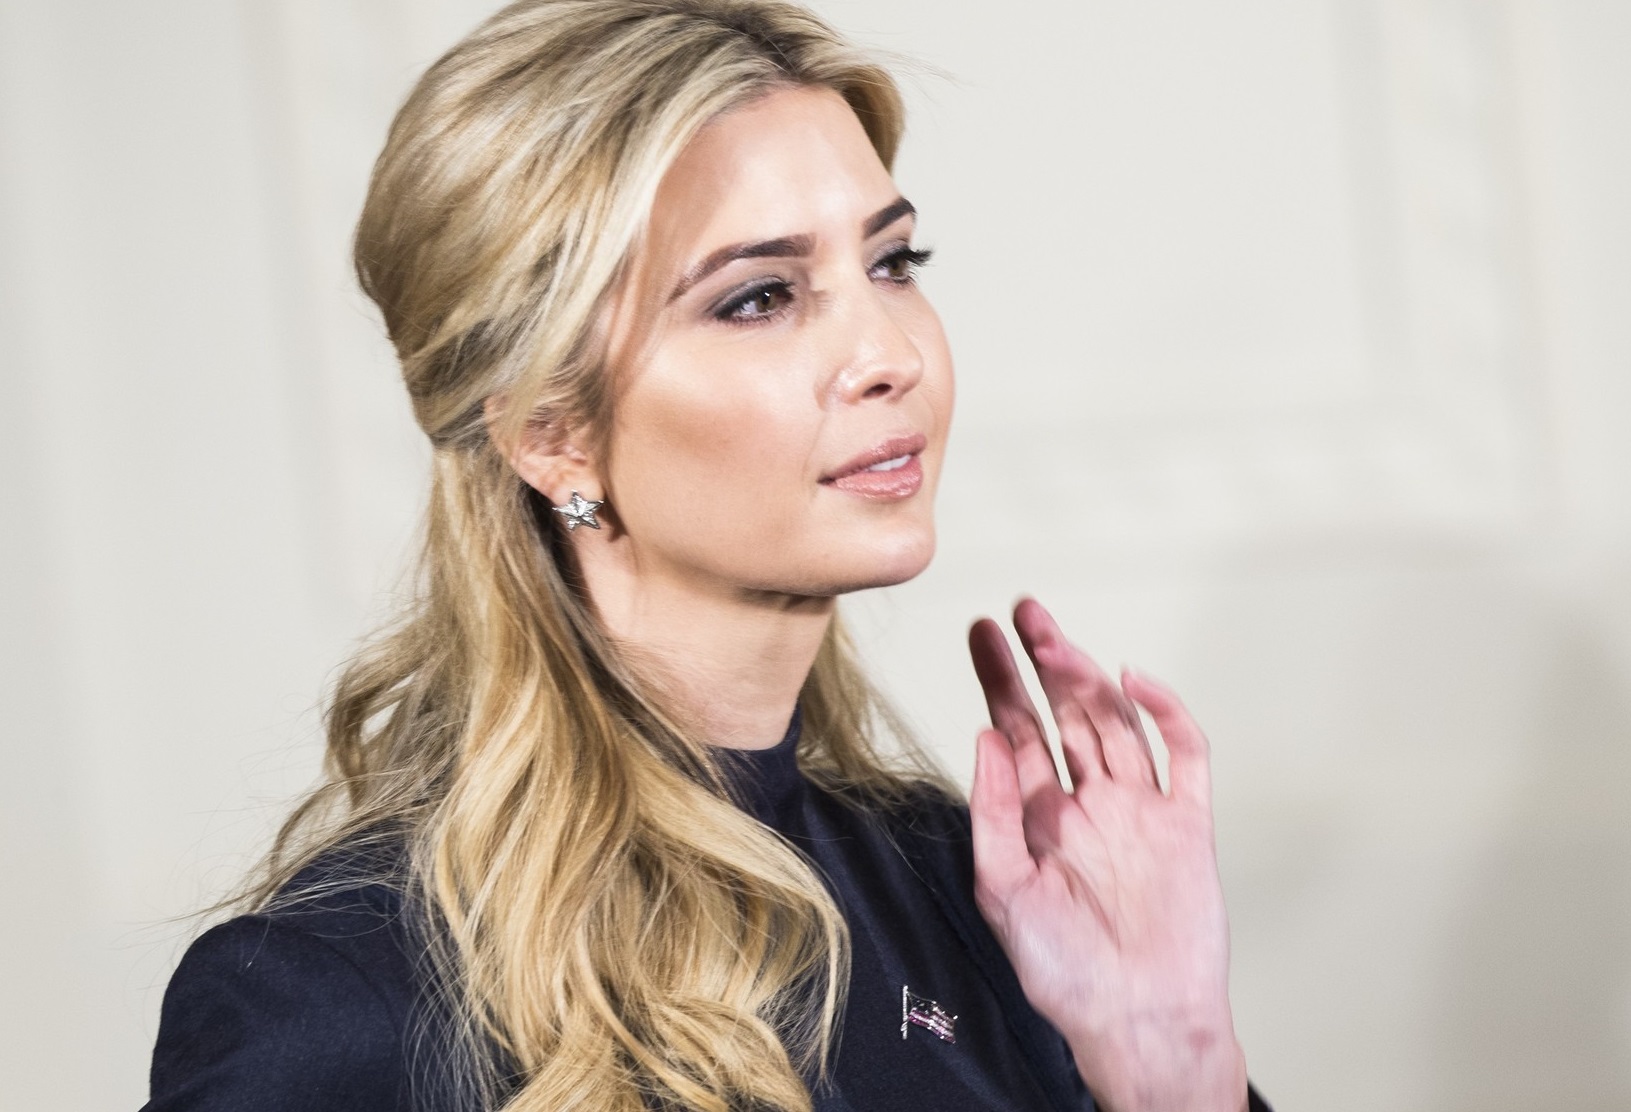 WASHINGTON, USA - MARCH 17: Ivanka Trump arrives for a joint press conference by U.S. President Donald Trump (not seen) and German Chancellor Angela Merkel (not seen) at the White House during Chancellor Merkel's visit to Washington, United States on March 17, 2017. Samuel Corum / Anadolu Agency, Image: 325687639, License: Rights-managed, Restrictions: , Model Release: no, Credit line: Profimedia, Abaca